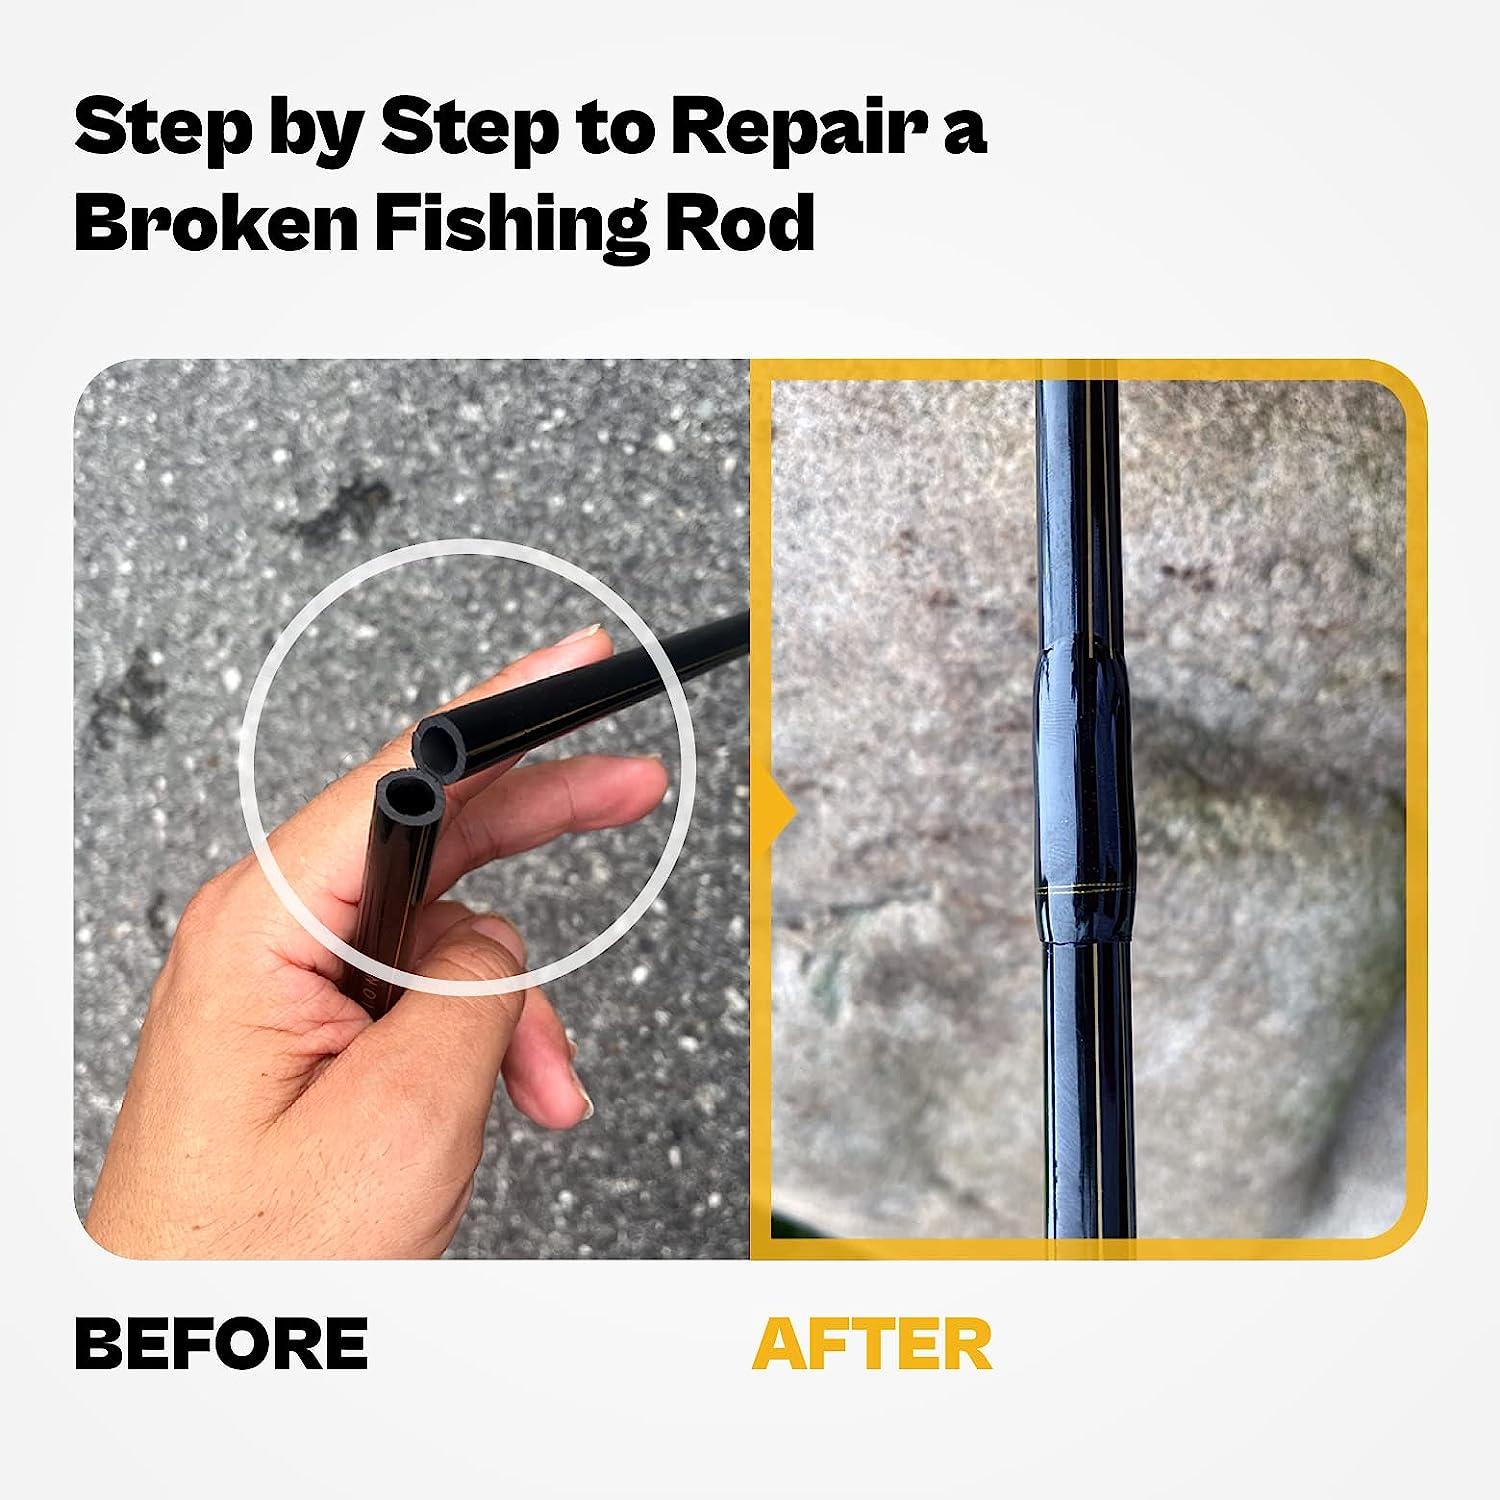 OJYDOIIIY Fishing Rod Repair Kit Complete,All-in-one Supplies with Glue for Freshwater & Saltwater Broken Fishing Pole Repair with Carbon Fiber Sticks